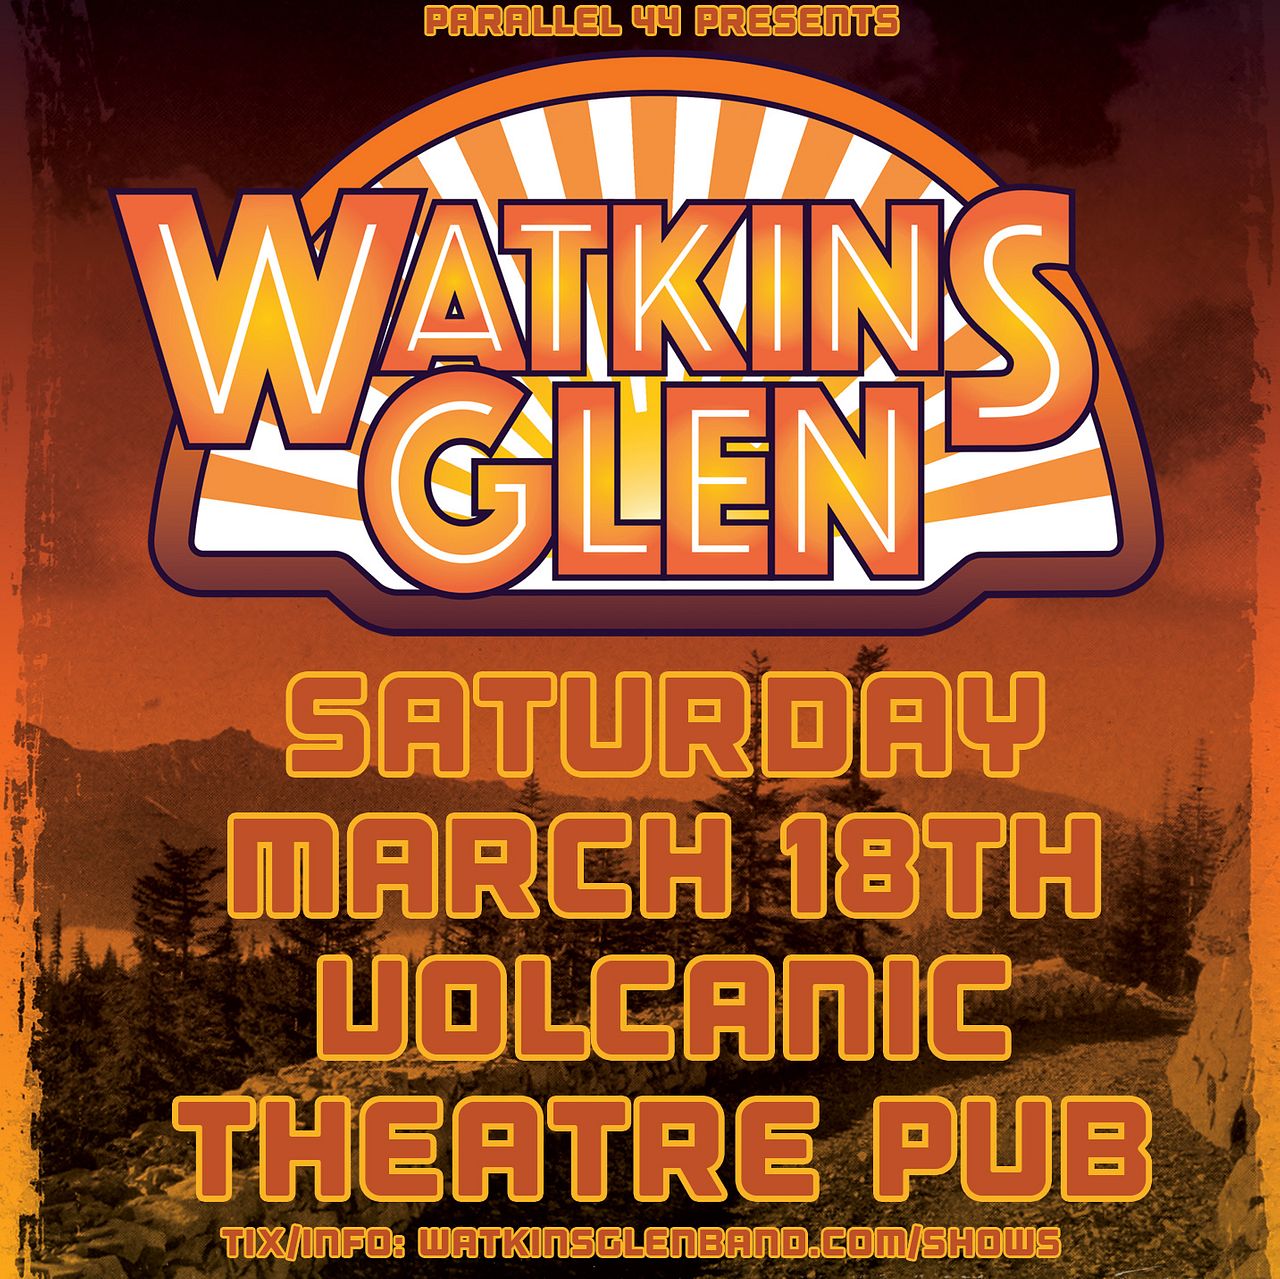 WATKINS GLEN Tickets at Volcanic Theater Pub in Bend by Volcanic